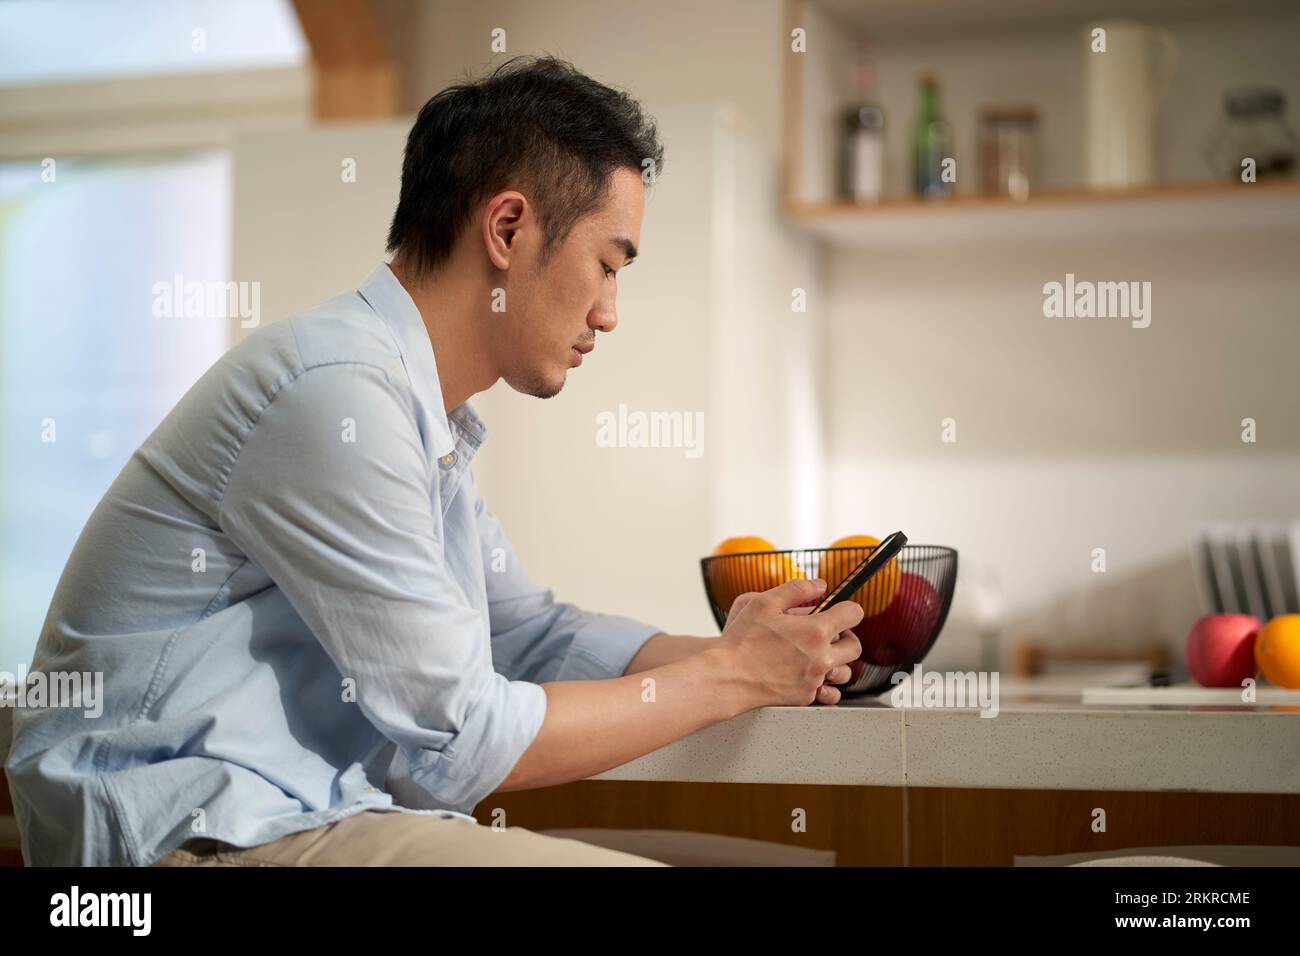 young asian adult man sitting at kitchen counter using mobile phone Stock Photo